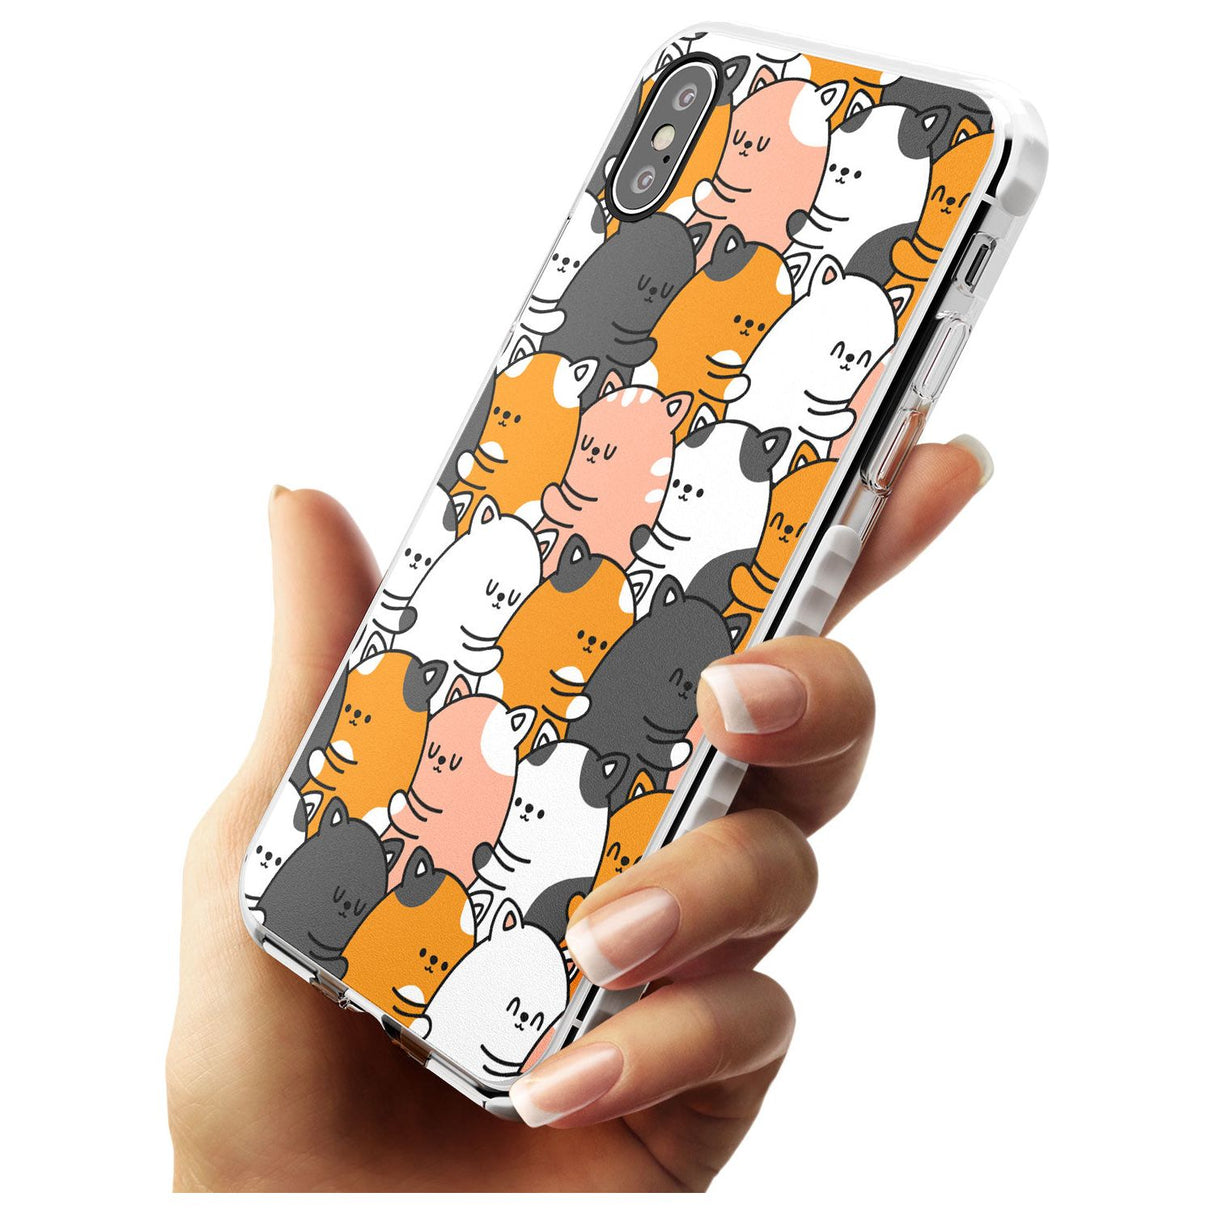 Spooning Cats Kawaii Pattern Impact Phone Case for iPhone X XS Max XR